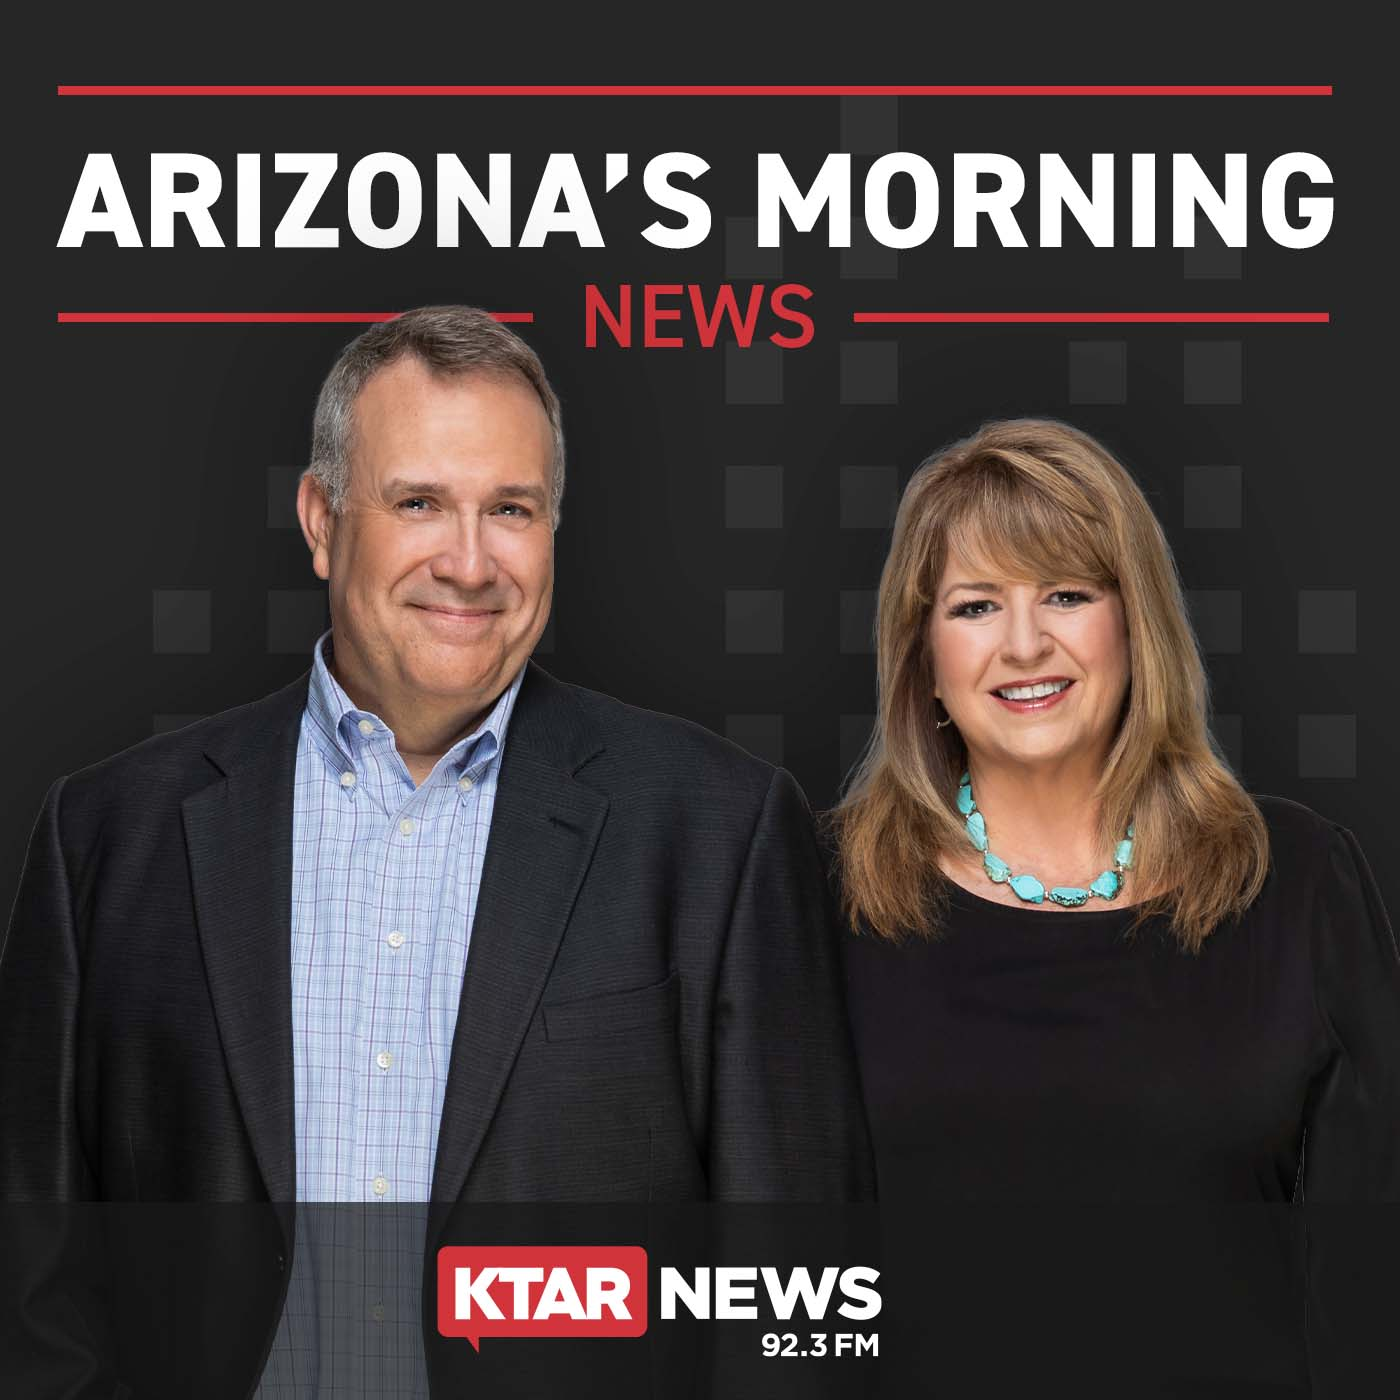 Sharper Point Commentary - Reactions to Arizona reopening